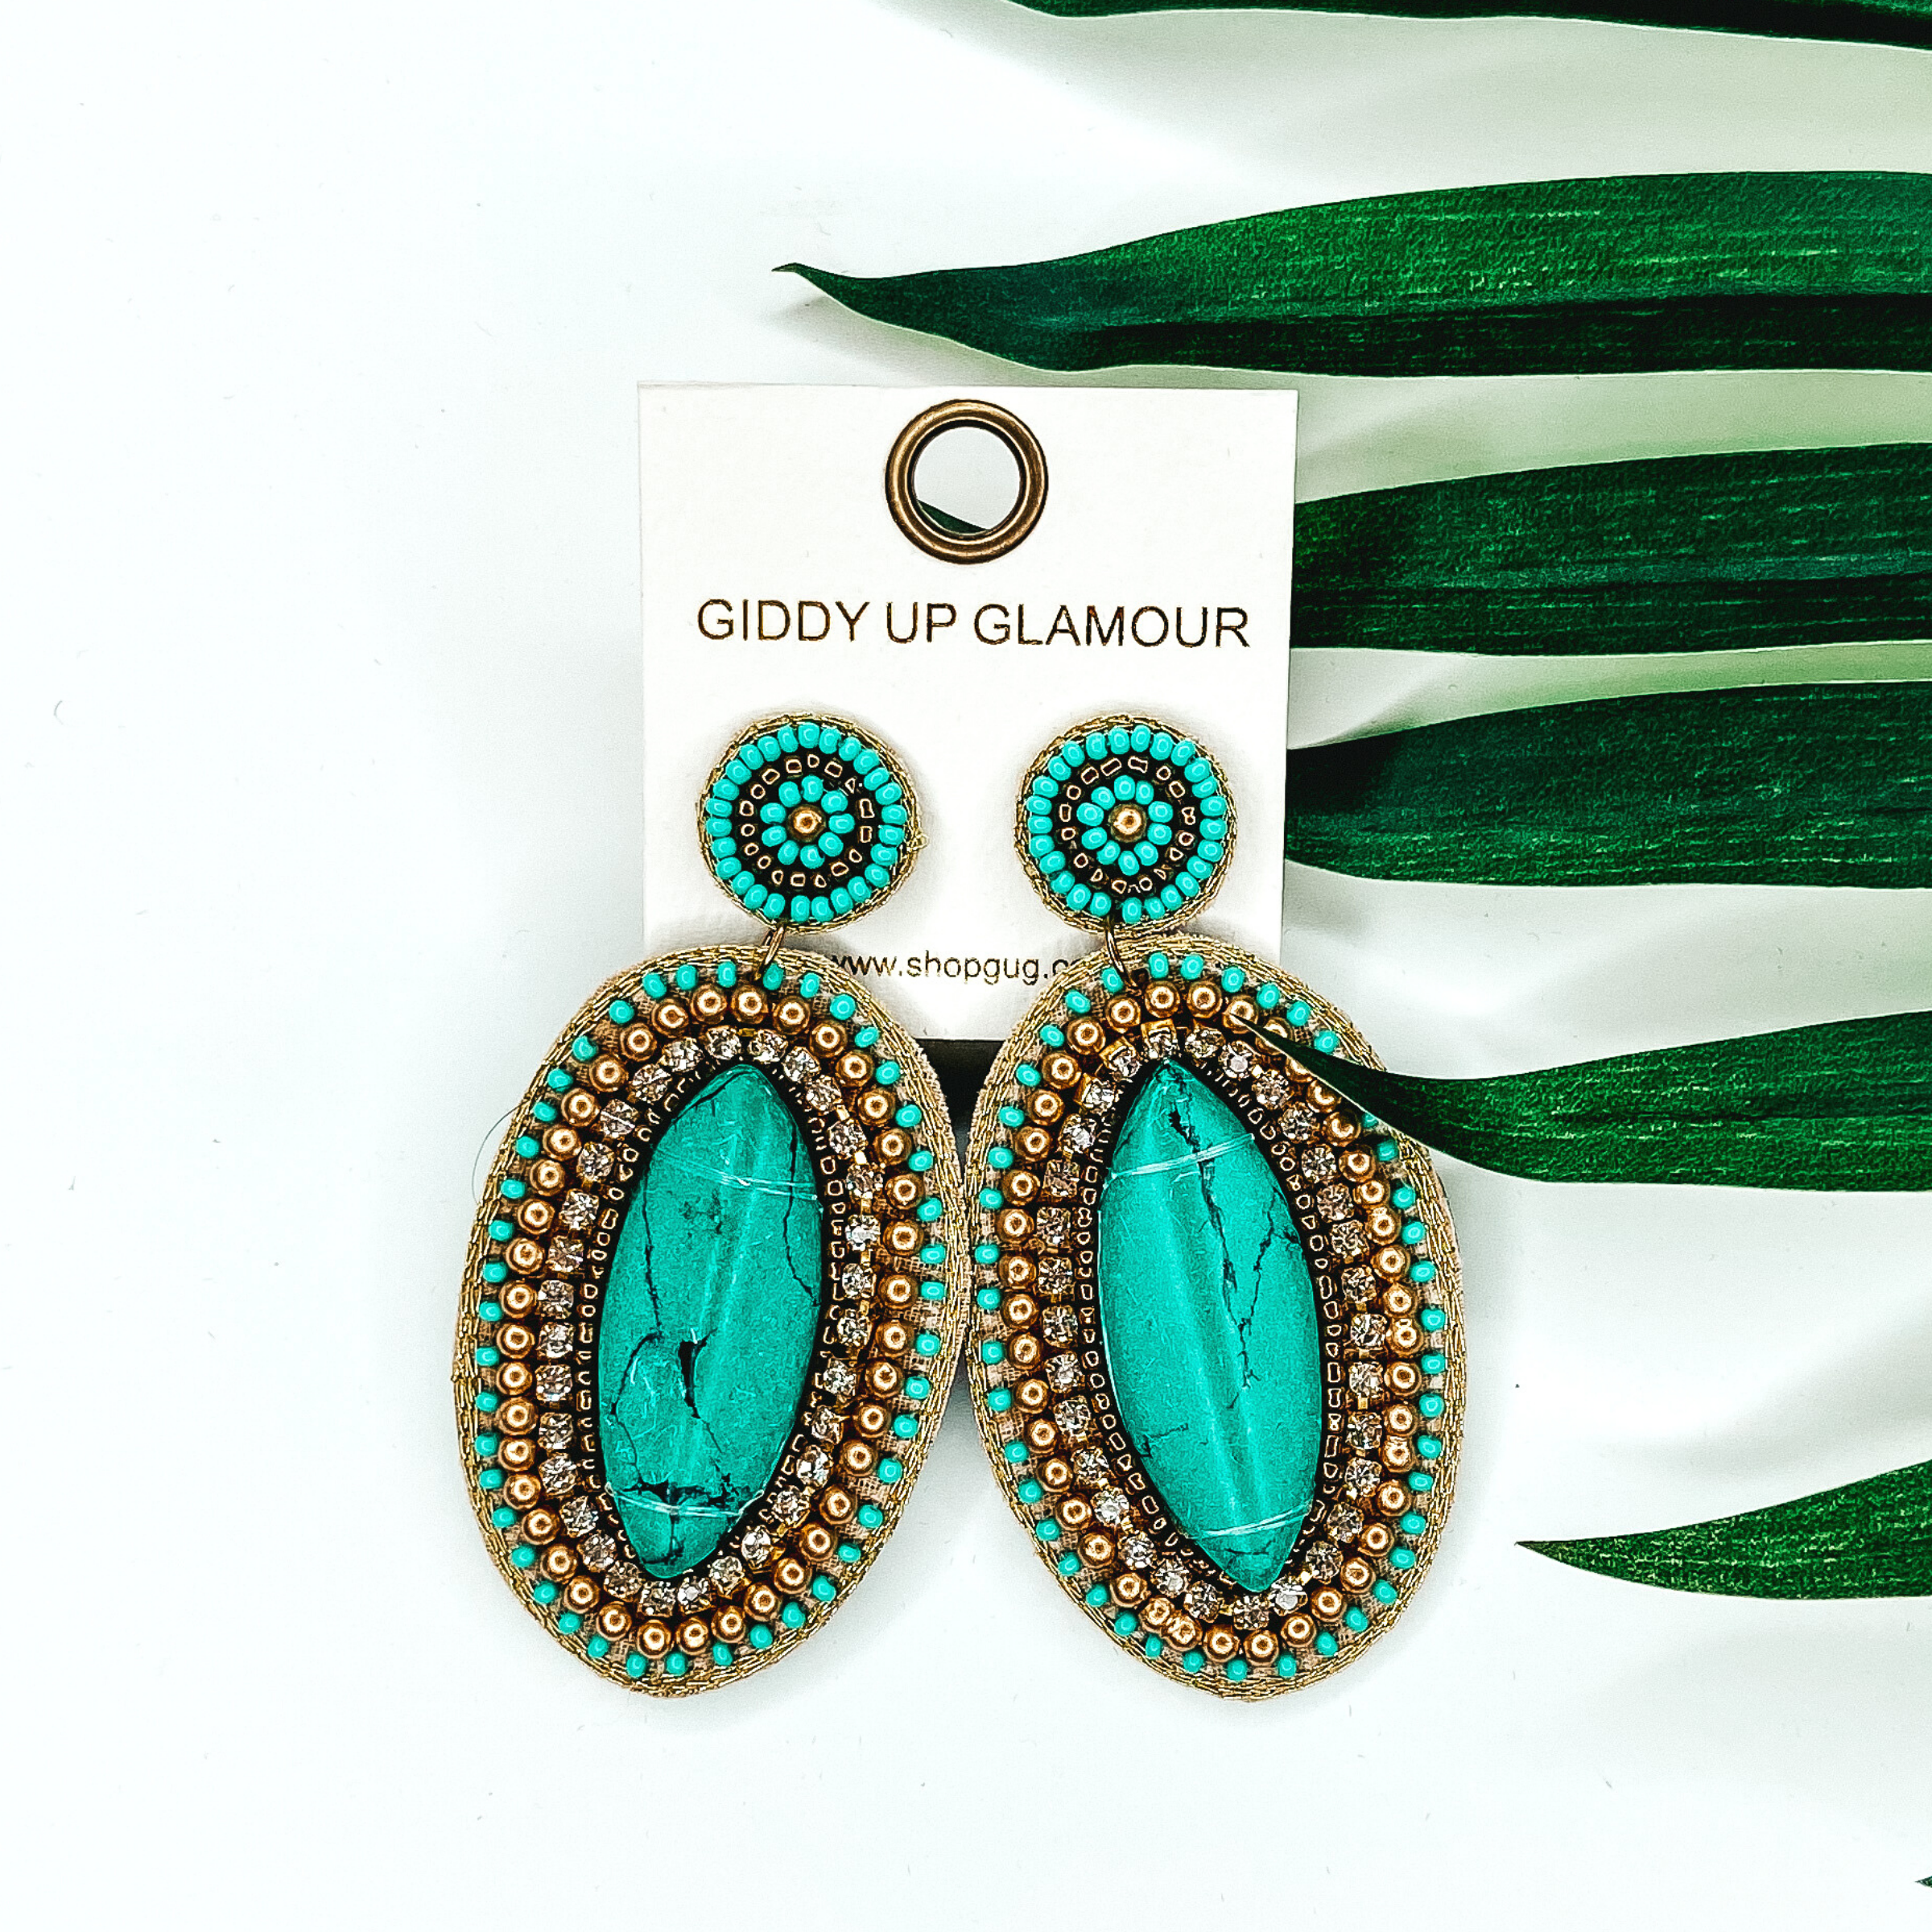 Beaded oval earrings in gold and turquoise. These earrings include a big center turquoise stone. These earrings are pictured on a white background with green leaves behind them.